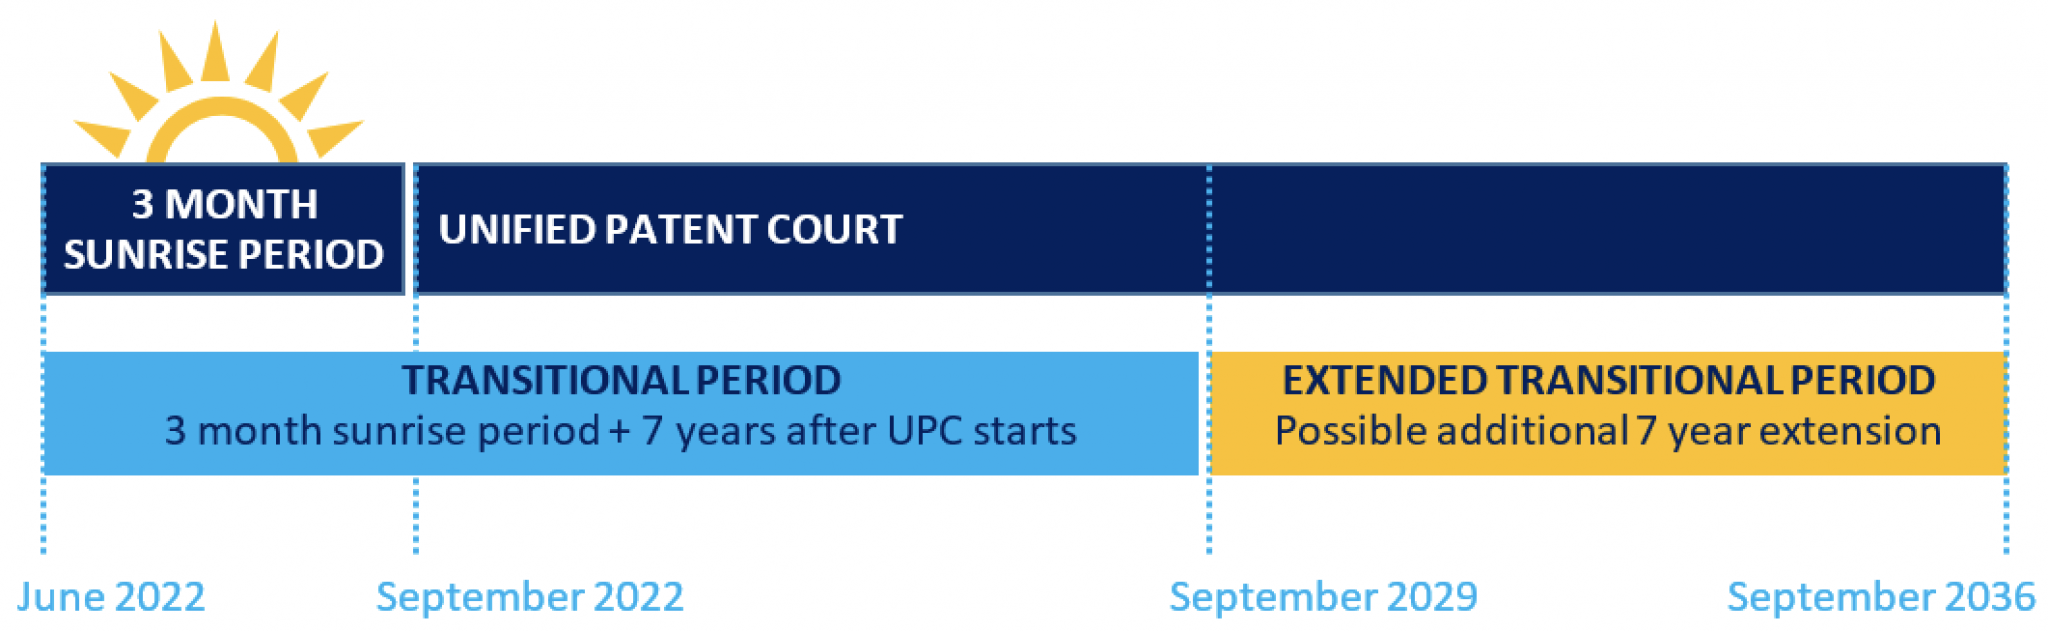 Upc opt out timeline